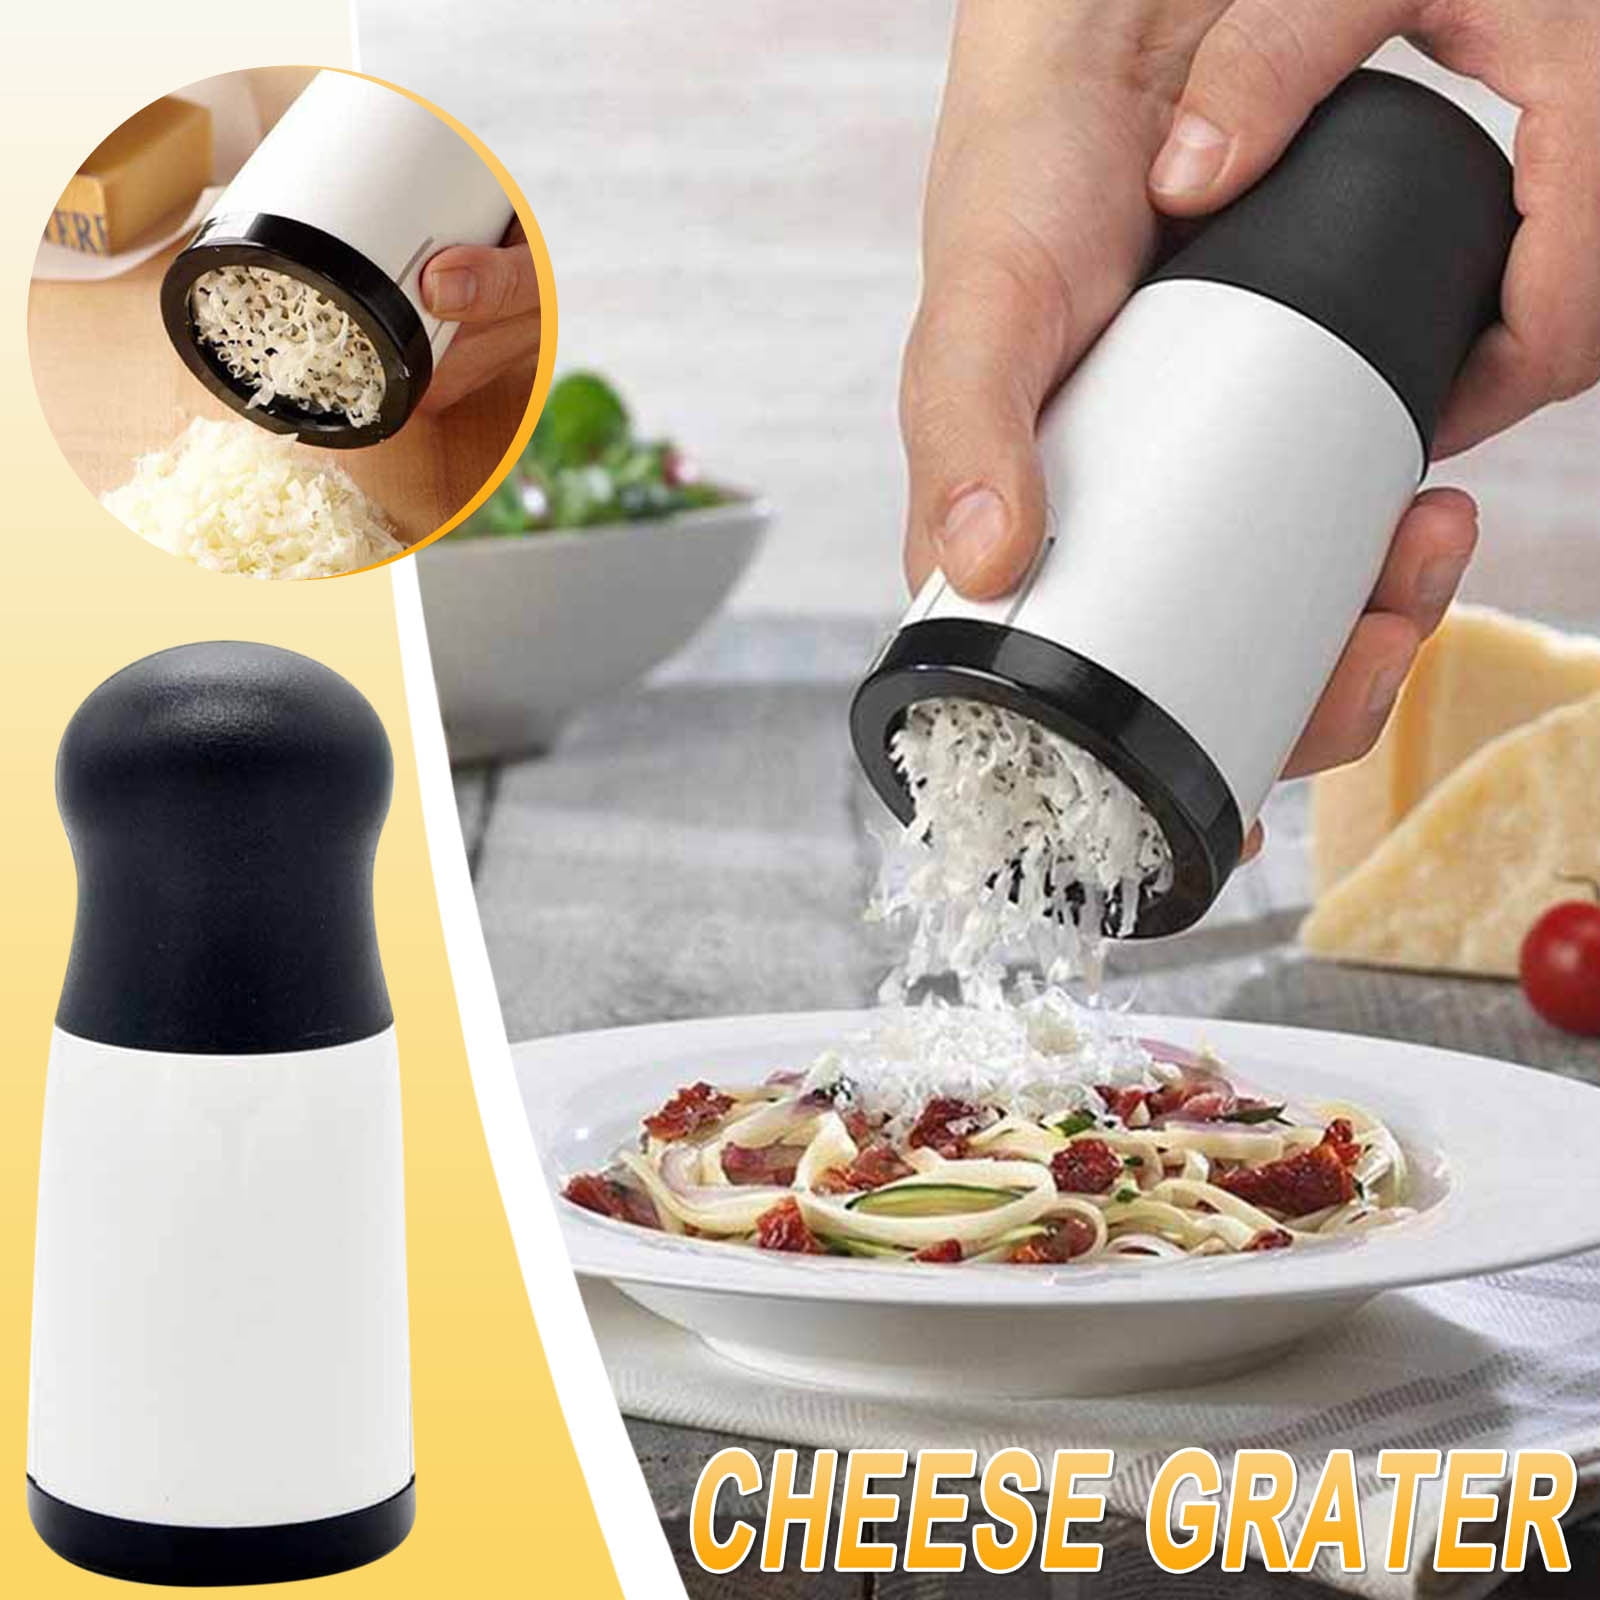 D) Cheese Grater Stainless Steel Parmesan Kitchen Graters Vintage Fre